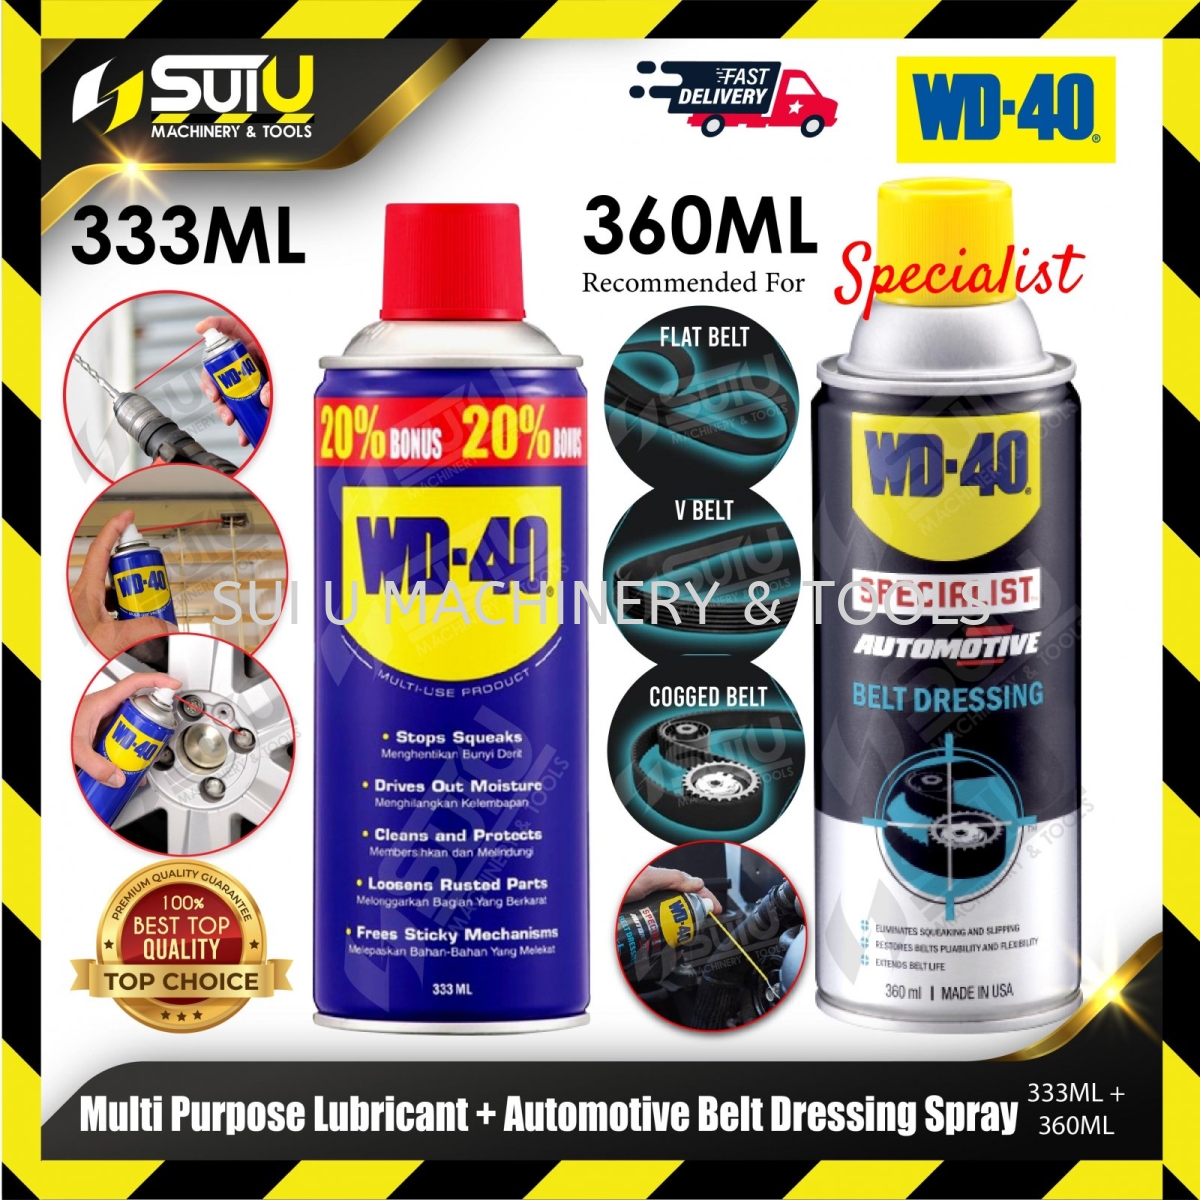 BELT DRESSING SPRAY CLEANING & LUBRICATING Pahang, Malaysia, Kuantan  Manufacturer, Supplier, Distributor, Supply